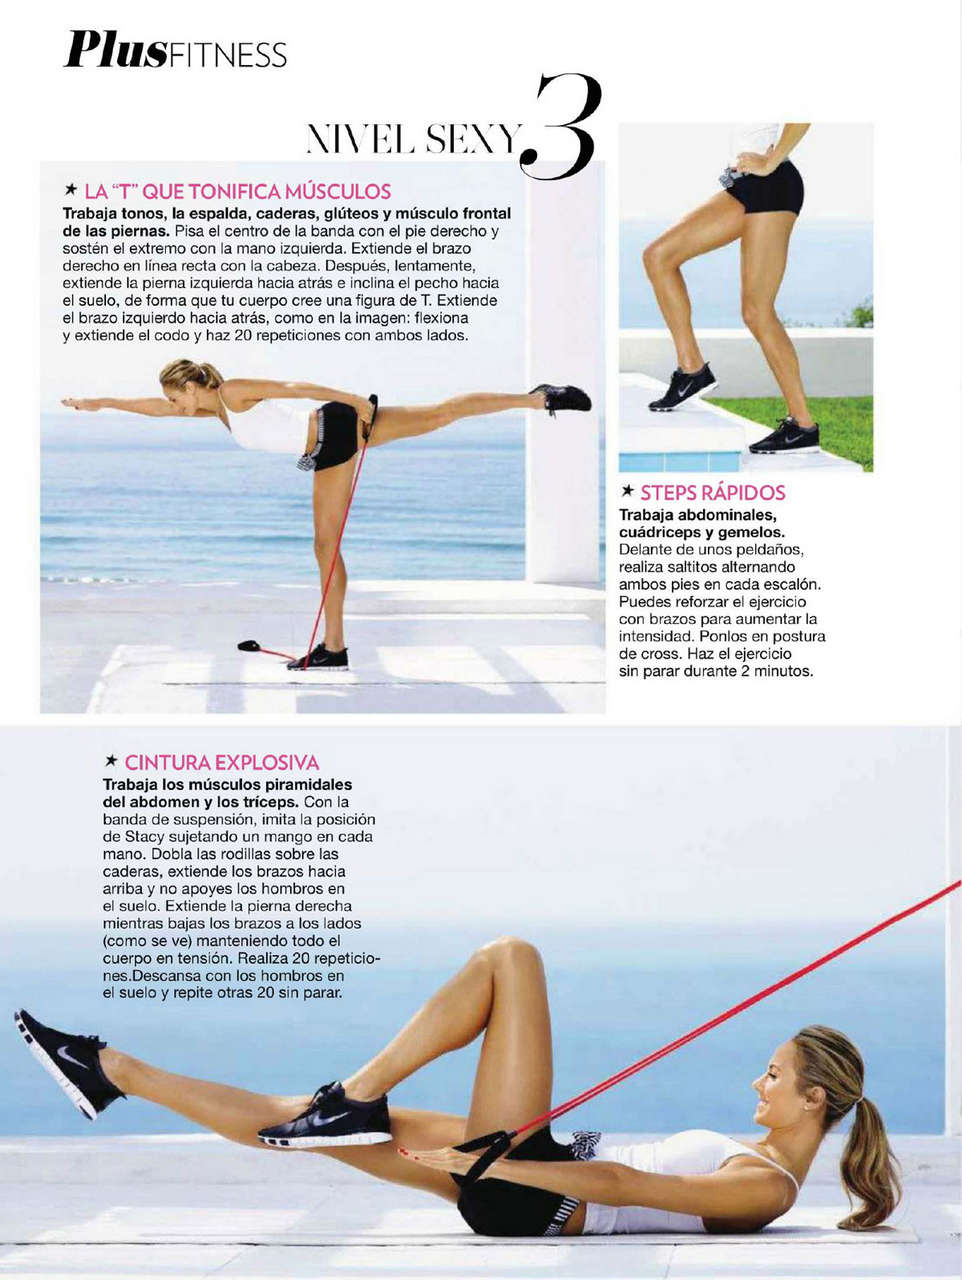 Stacy Keibler Gq Mahazine July 2012 Issue